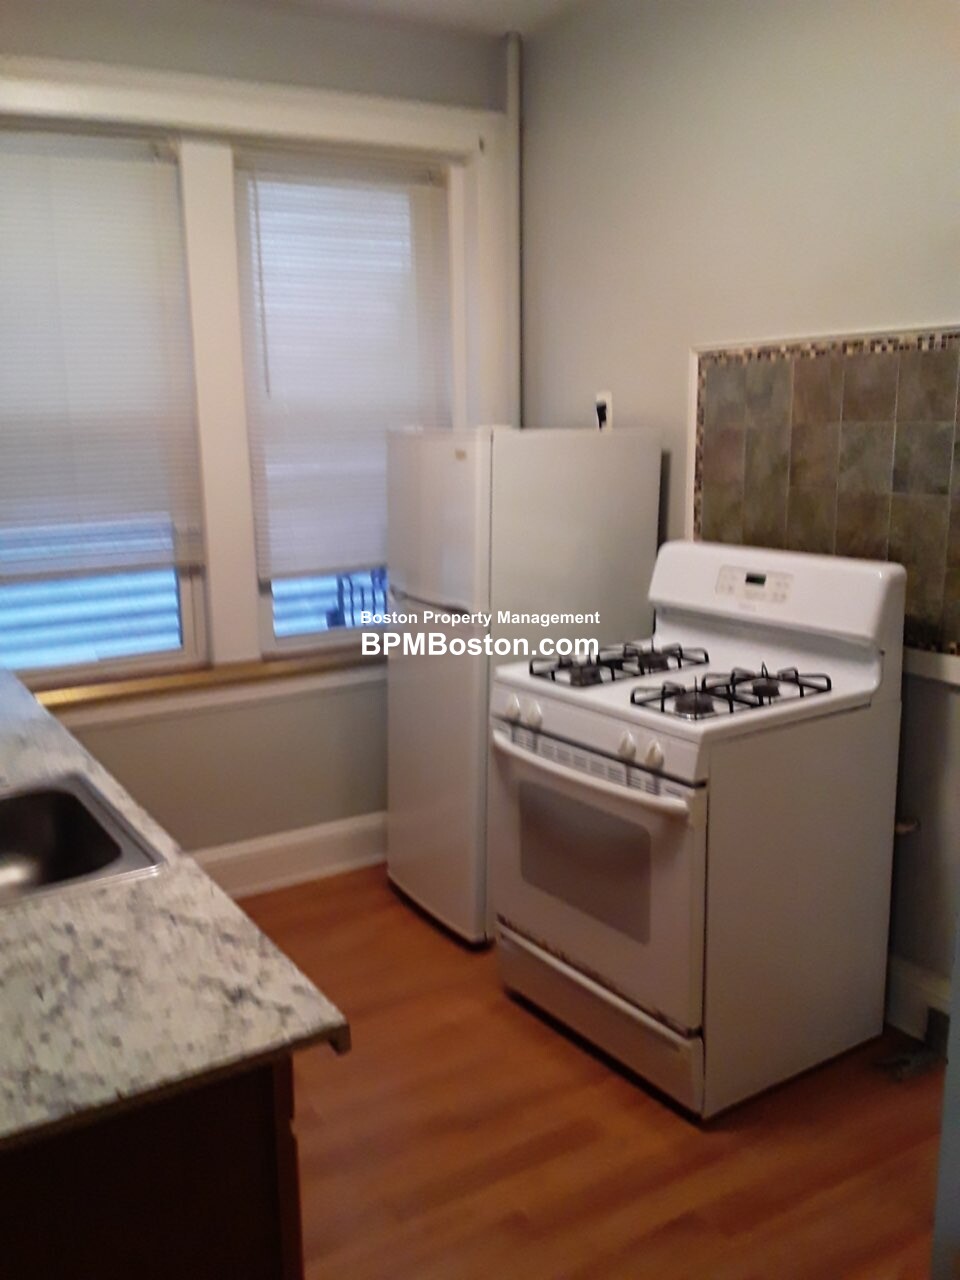 Photos of apartment on Admiral's Way,Chelsea MA 02150